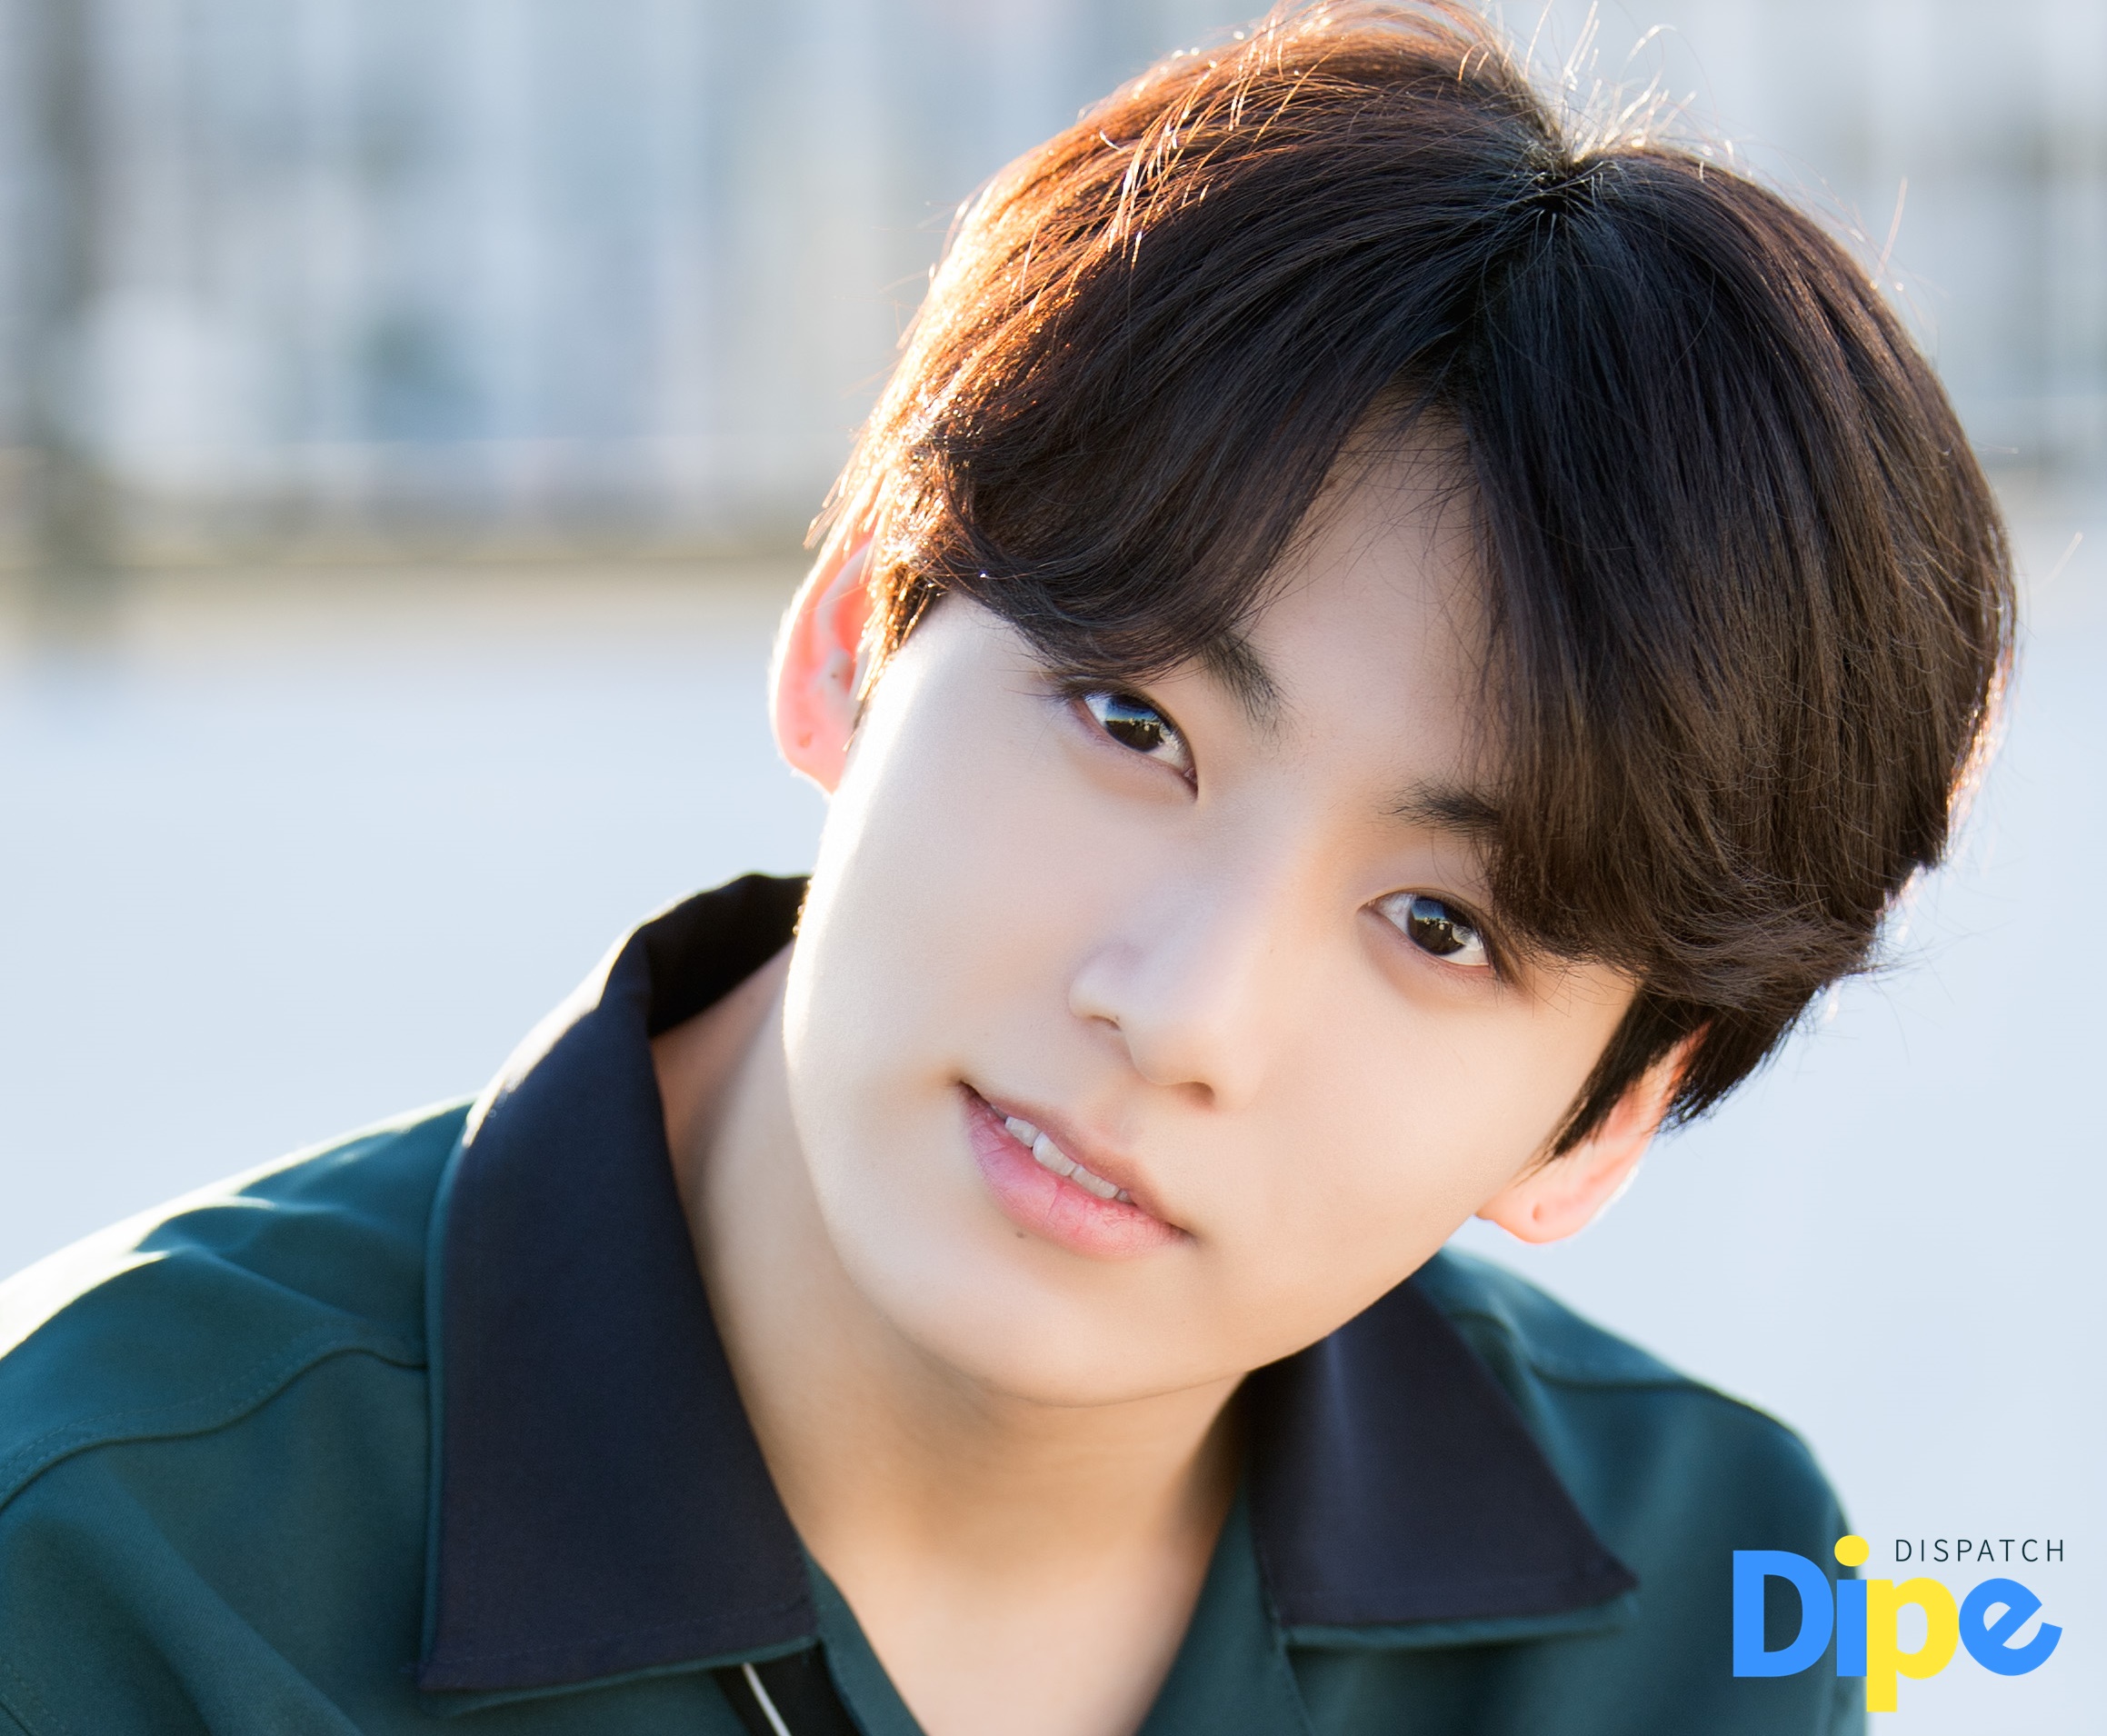 BTS' Jungkook tests positive for Covid days ahead of Grammys